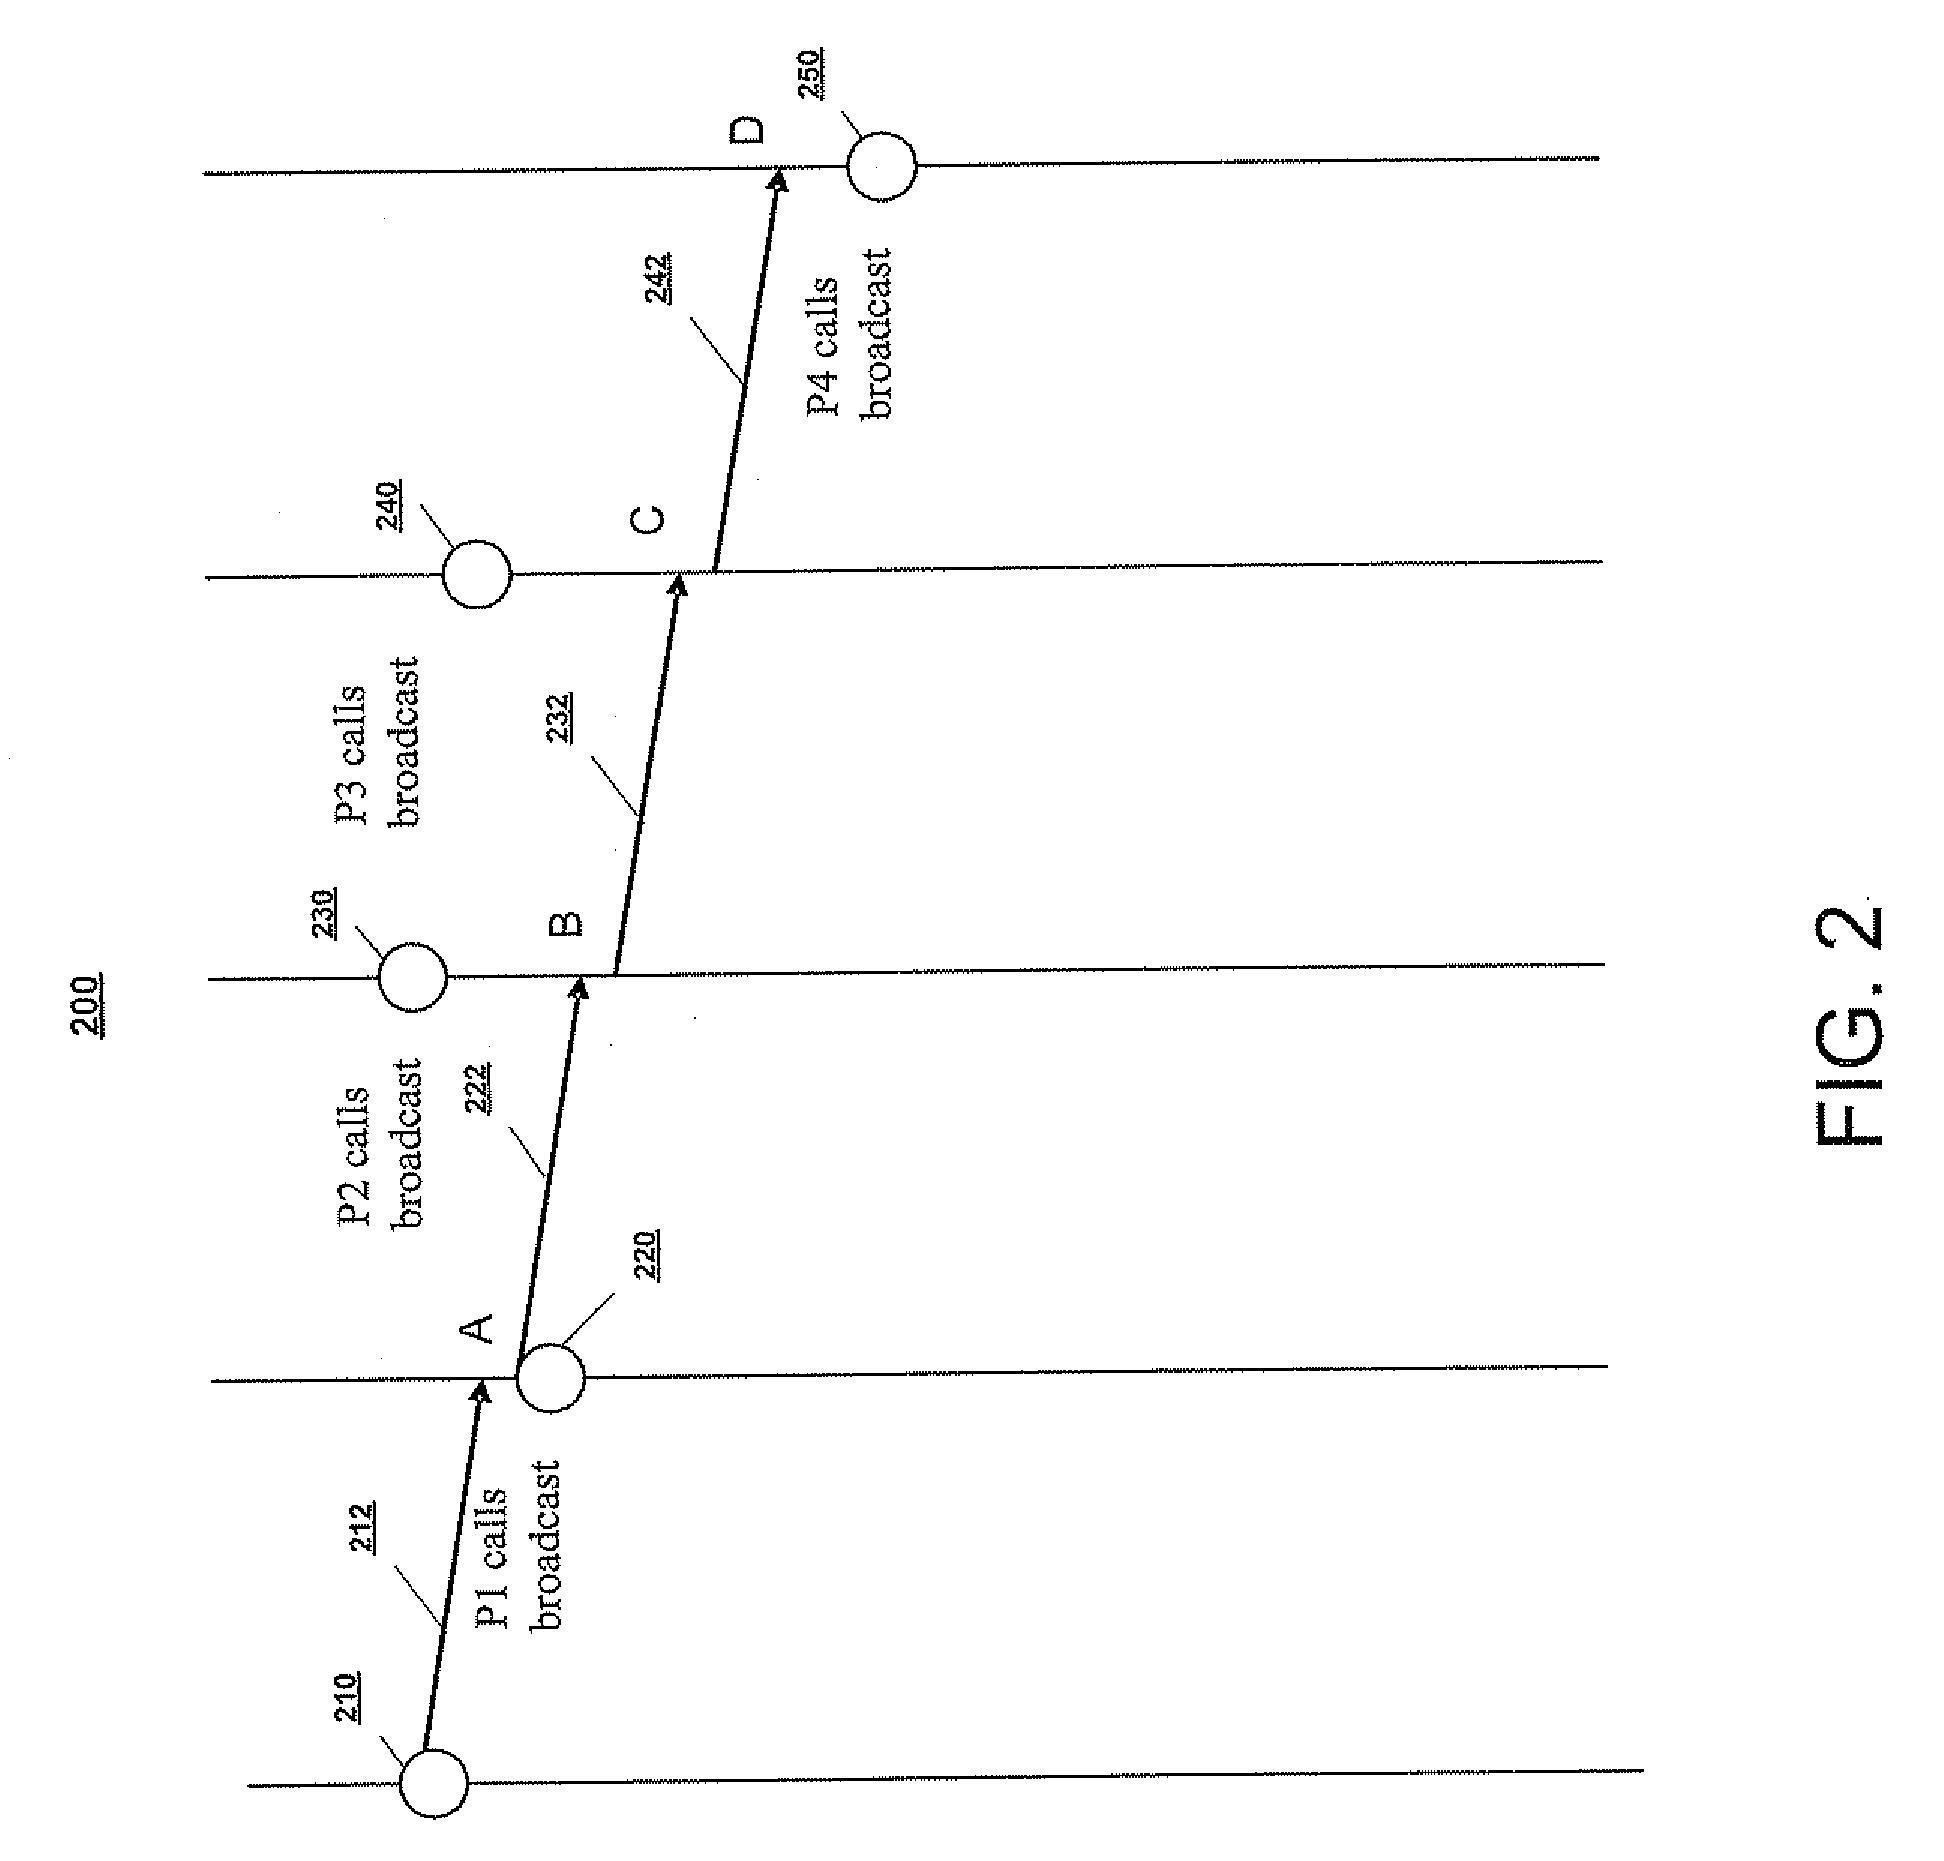 Asyncronous broadcast for ordered delivery between compute nodes in a parallel computing system where packet header space is limited